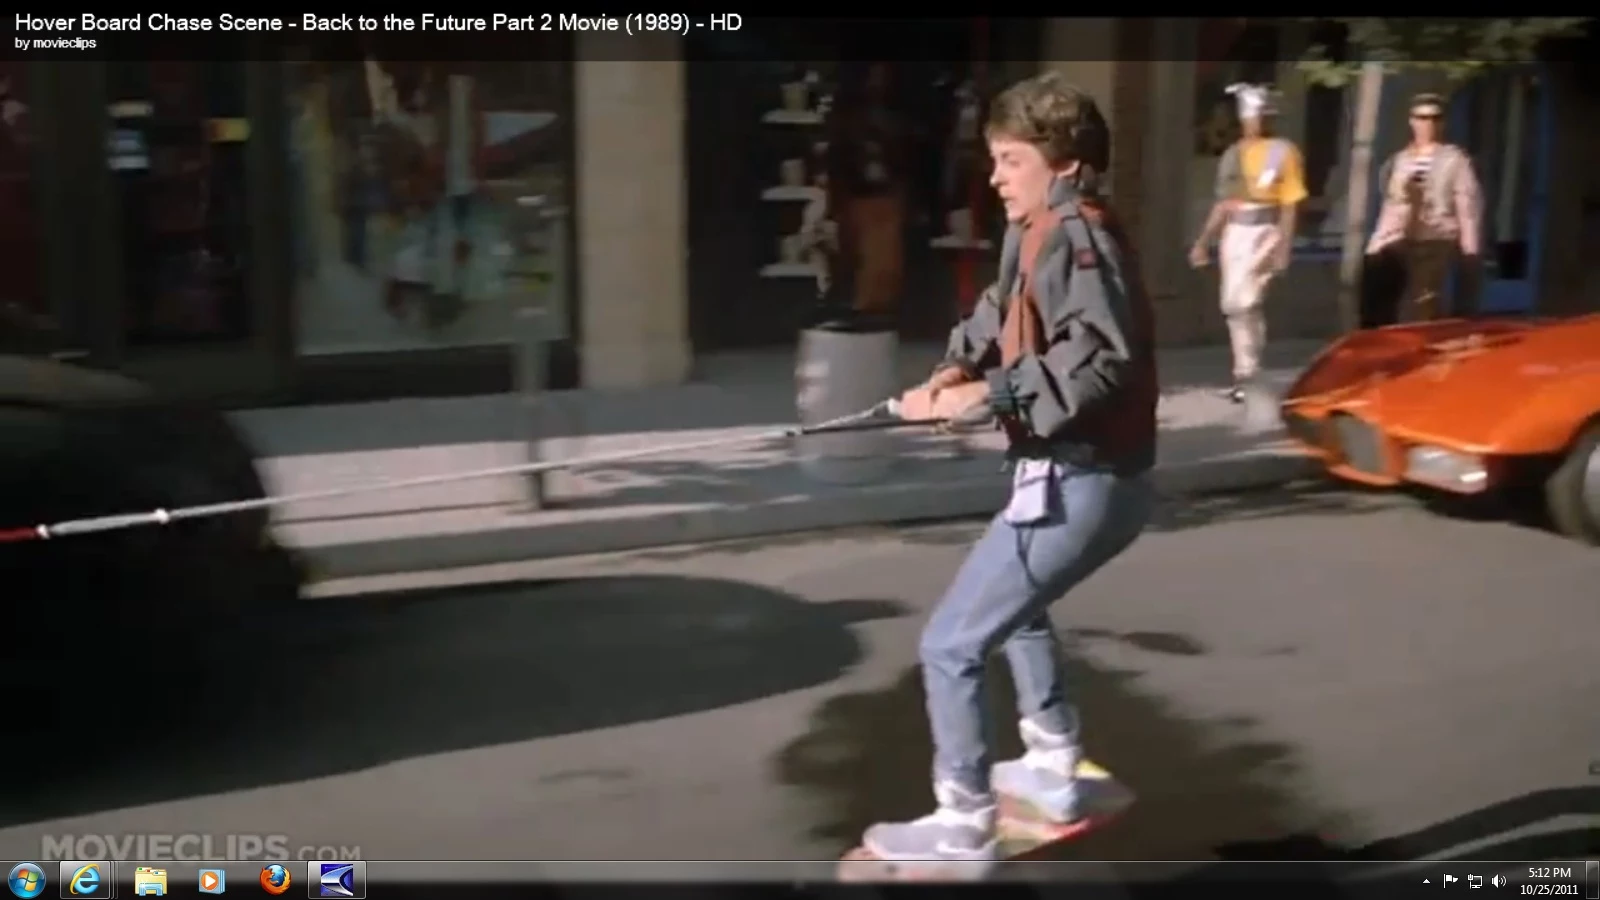 Back to the Future' Style Hoverboard May Finally Become a Reality